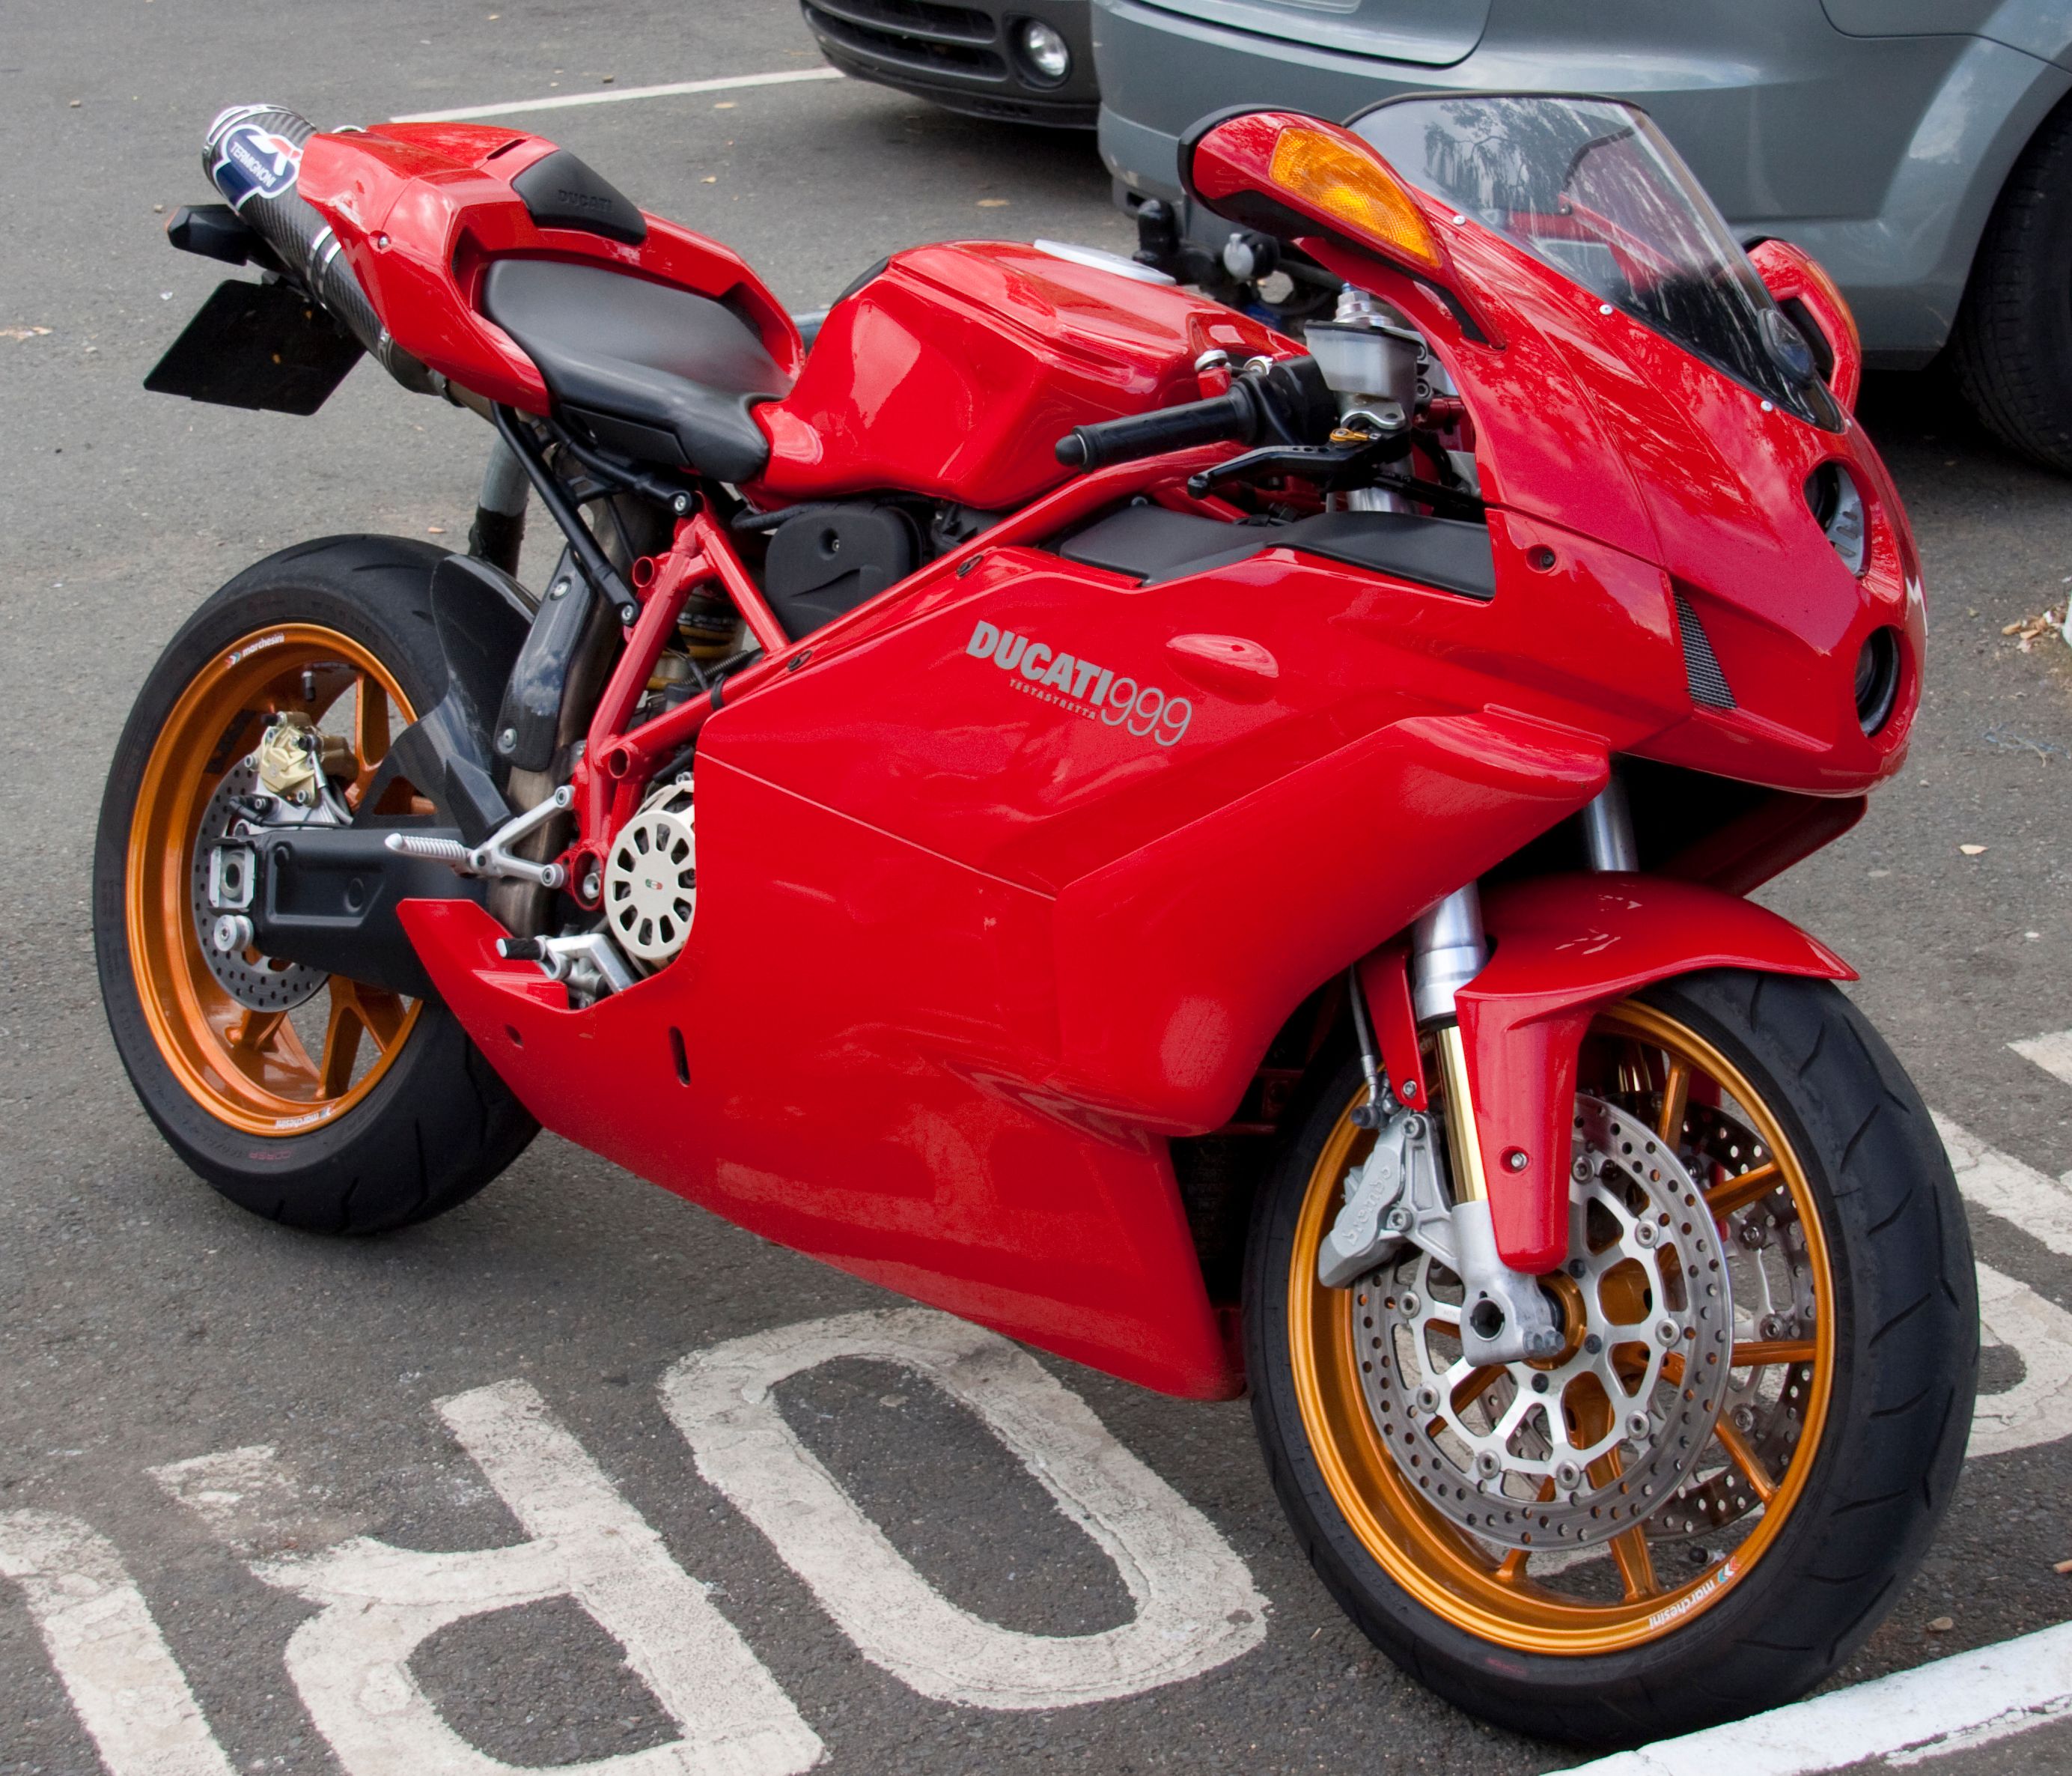 Ducati 999R at a parking